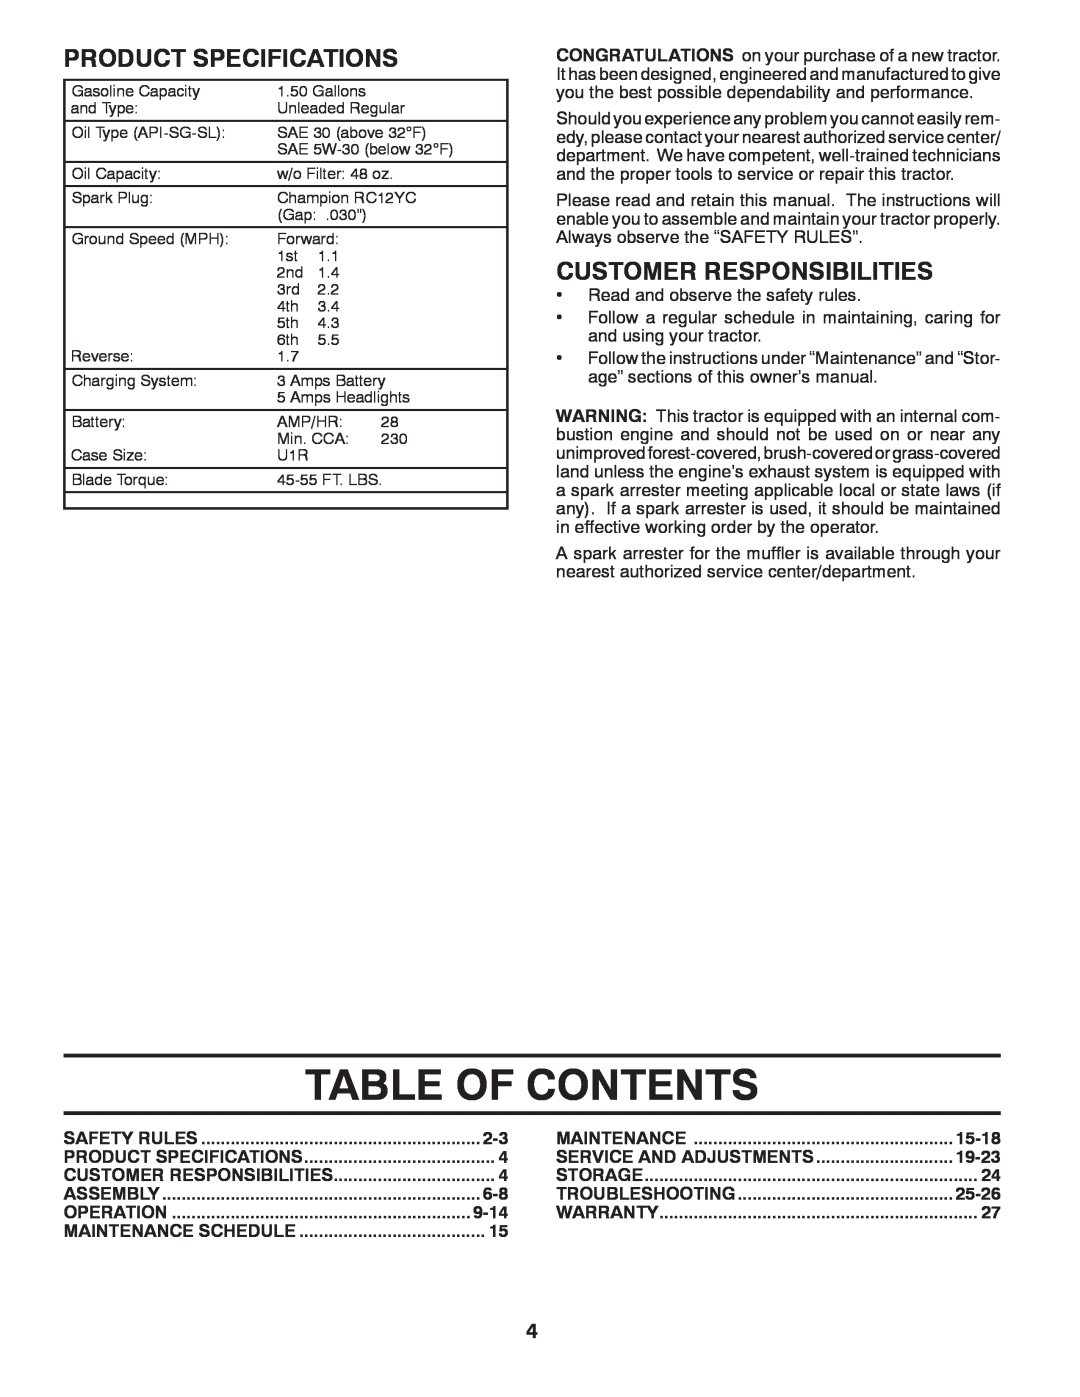 Poulan 425179 manual Table Of Contents, Product Specifications, Customer Responsibilities 